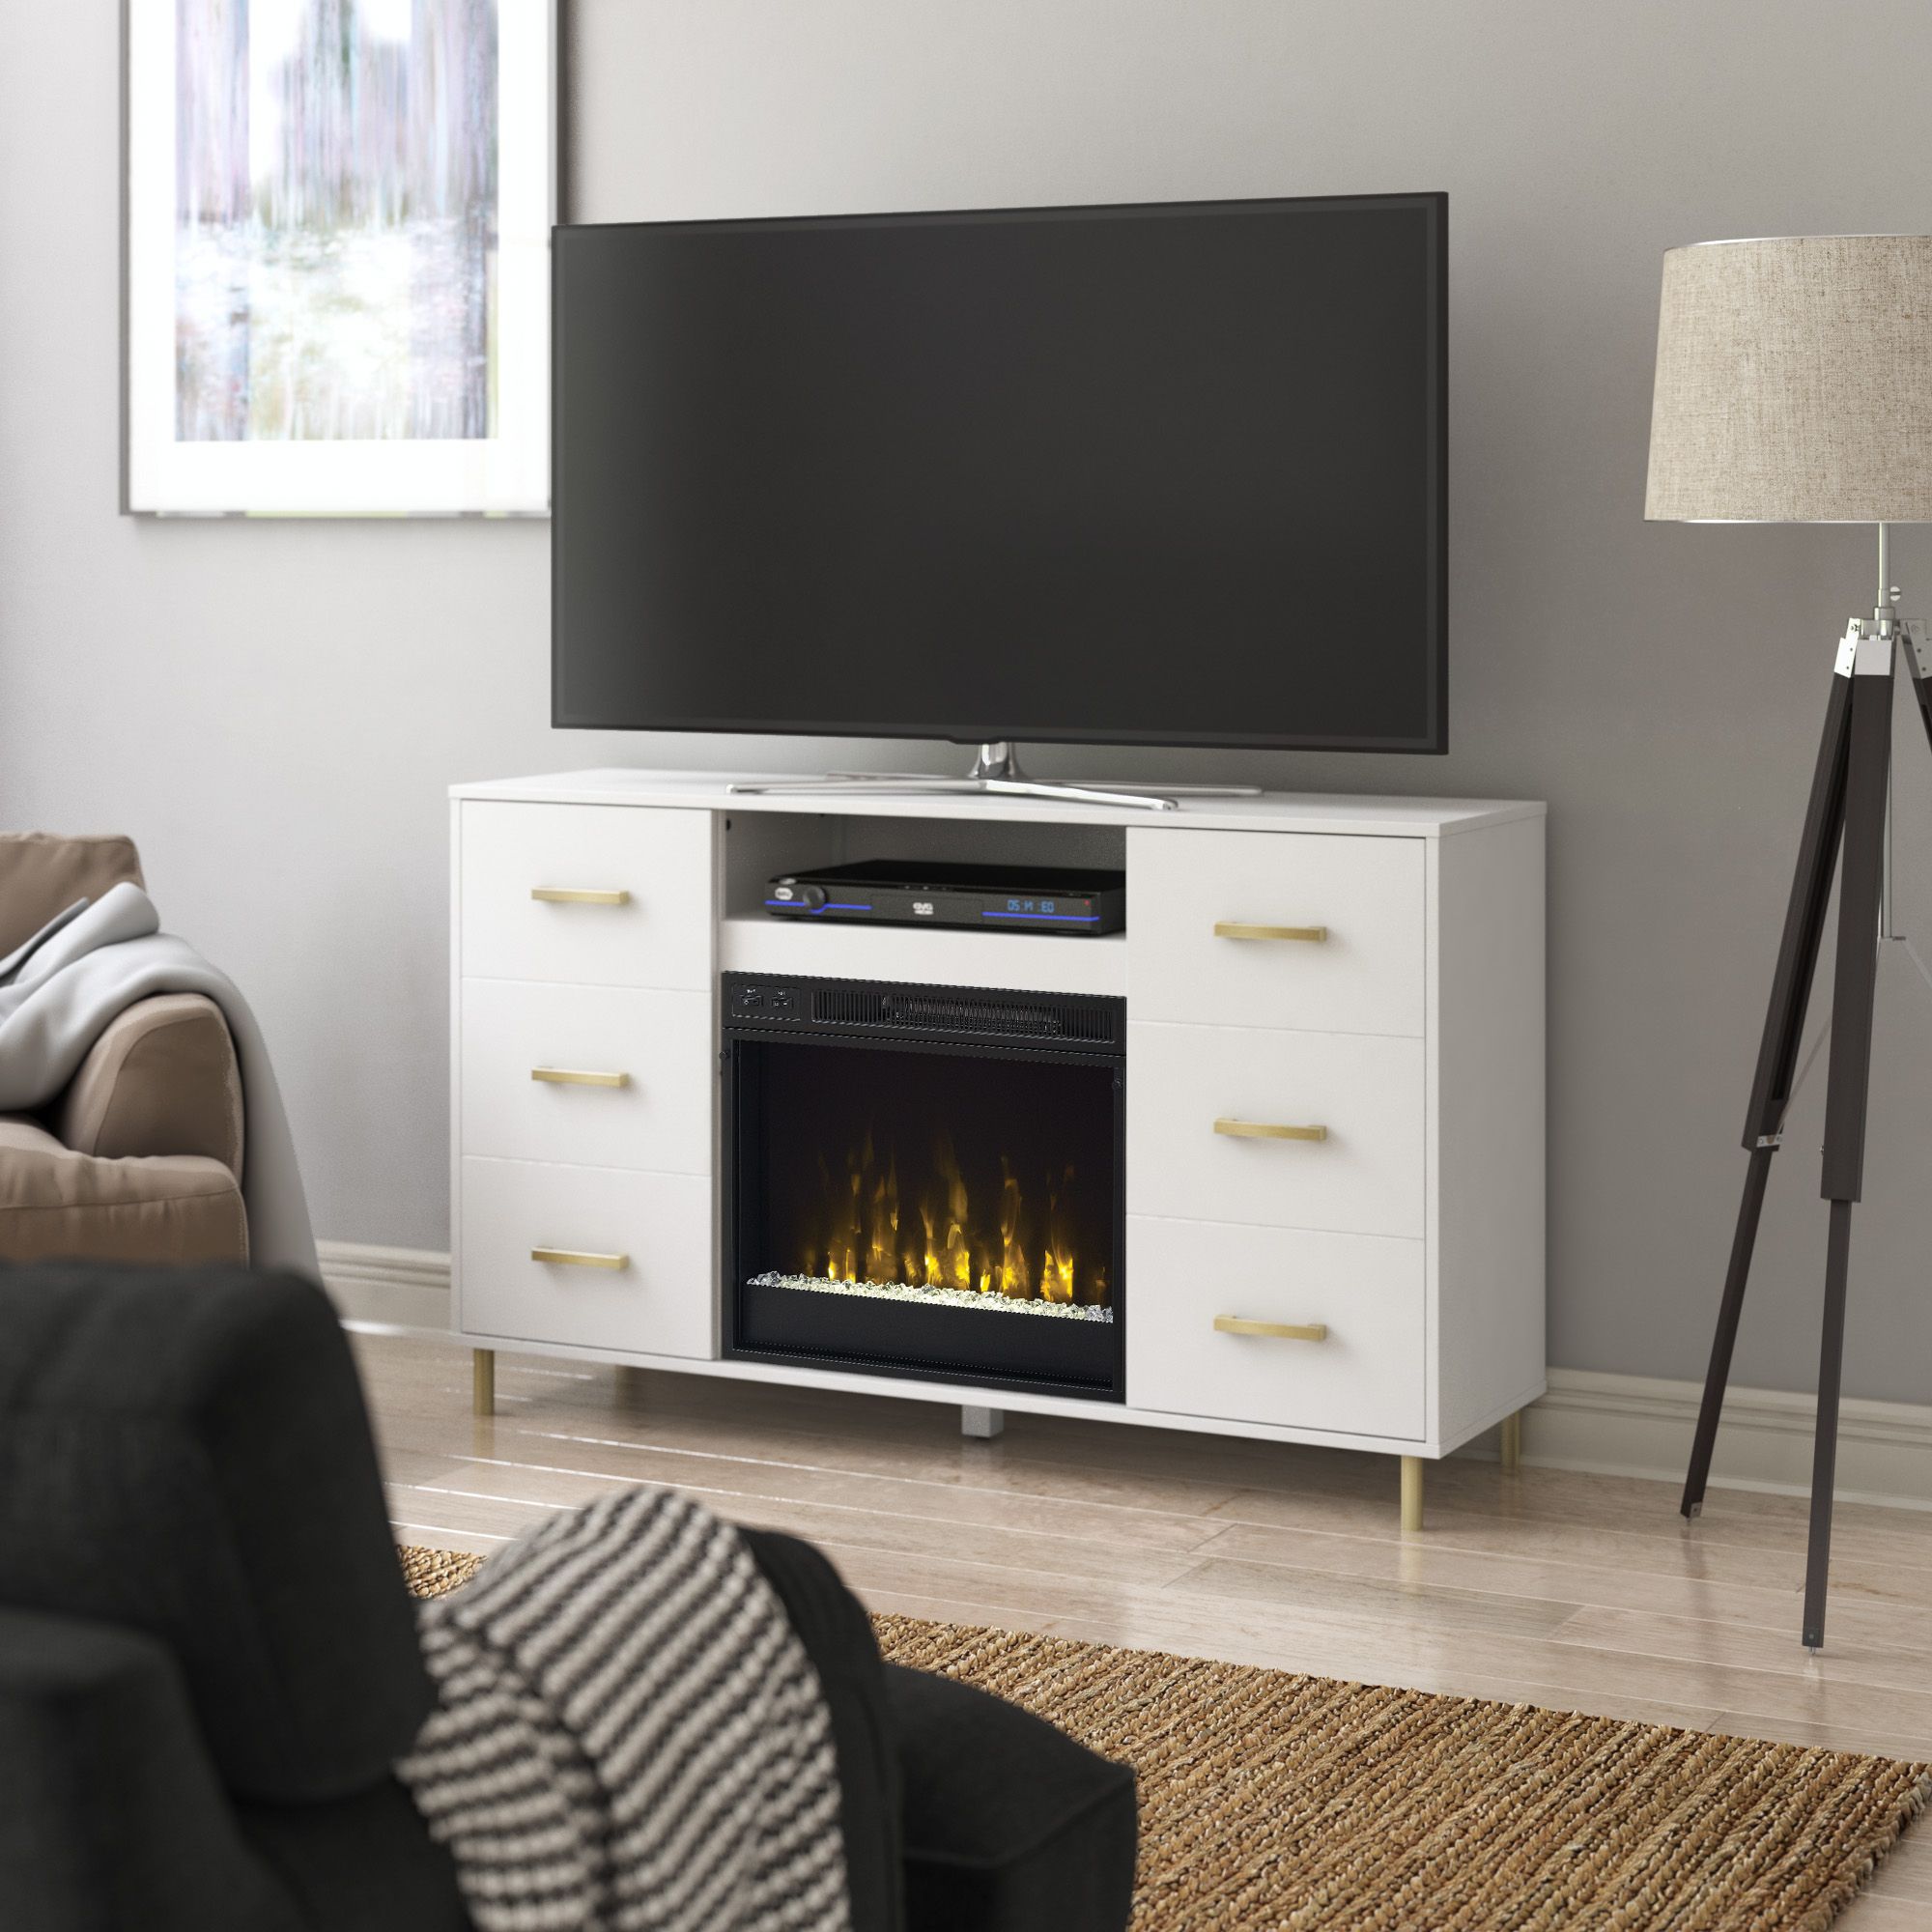 Recent Skofte Tv Stands For Tvs Up To 60" Within Tv Stand For Tvs Up To 60" With Electric Fireplace (View 2 of 20)